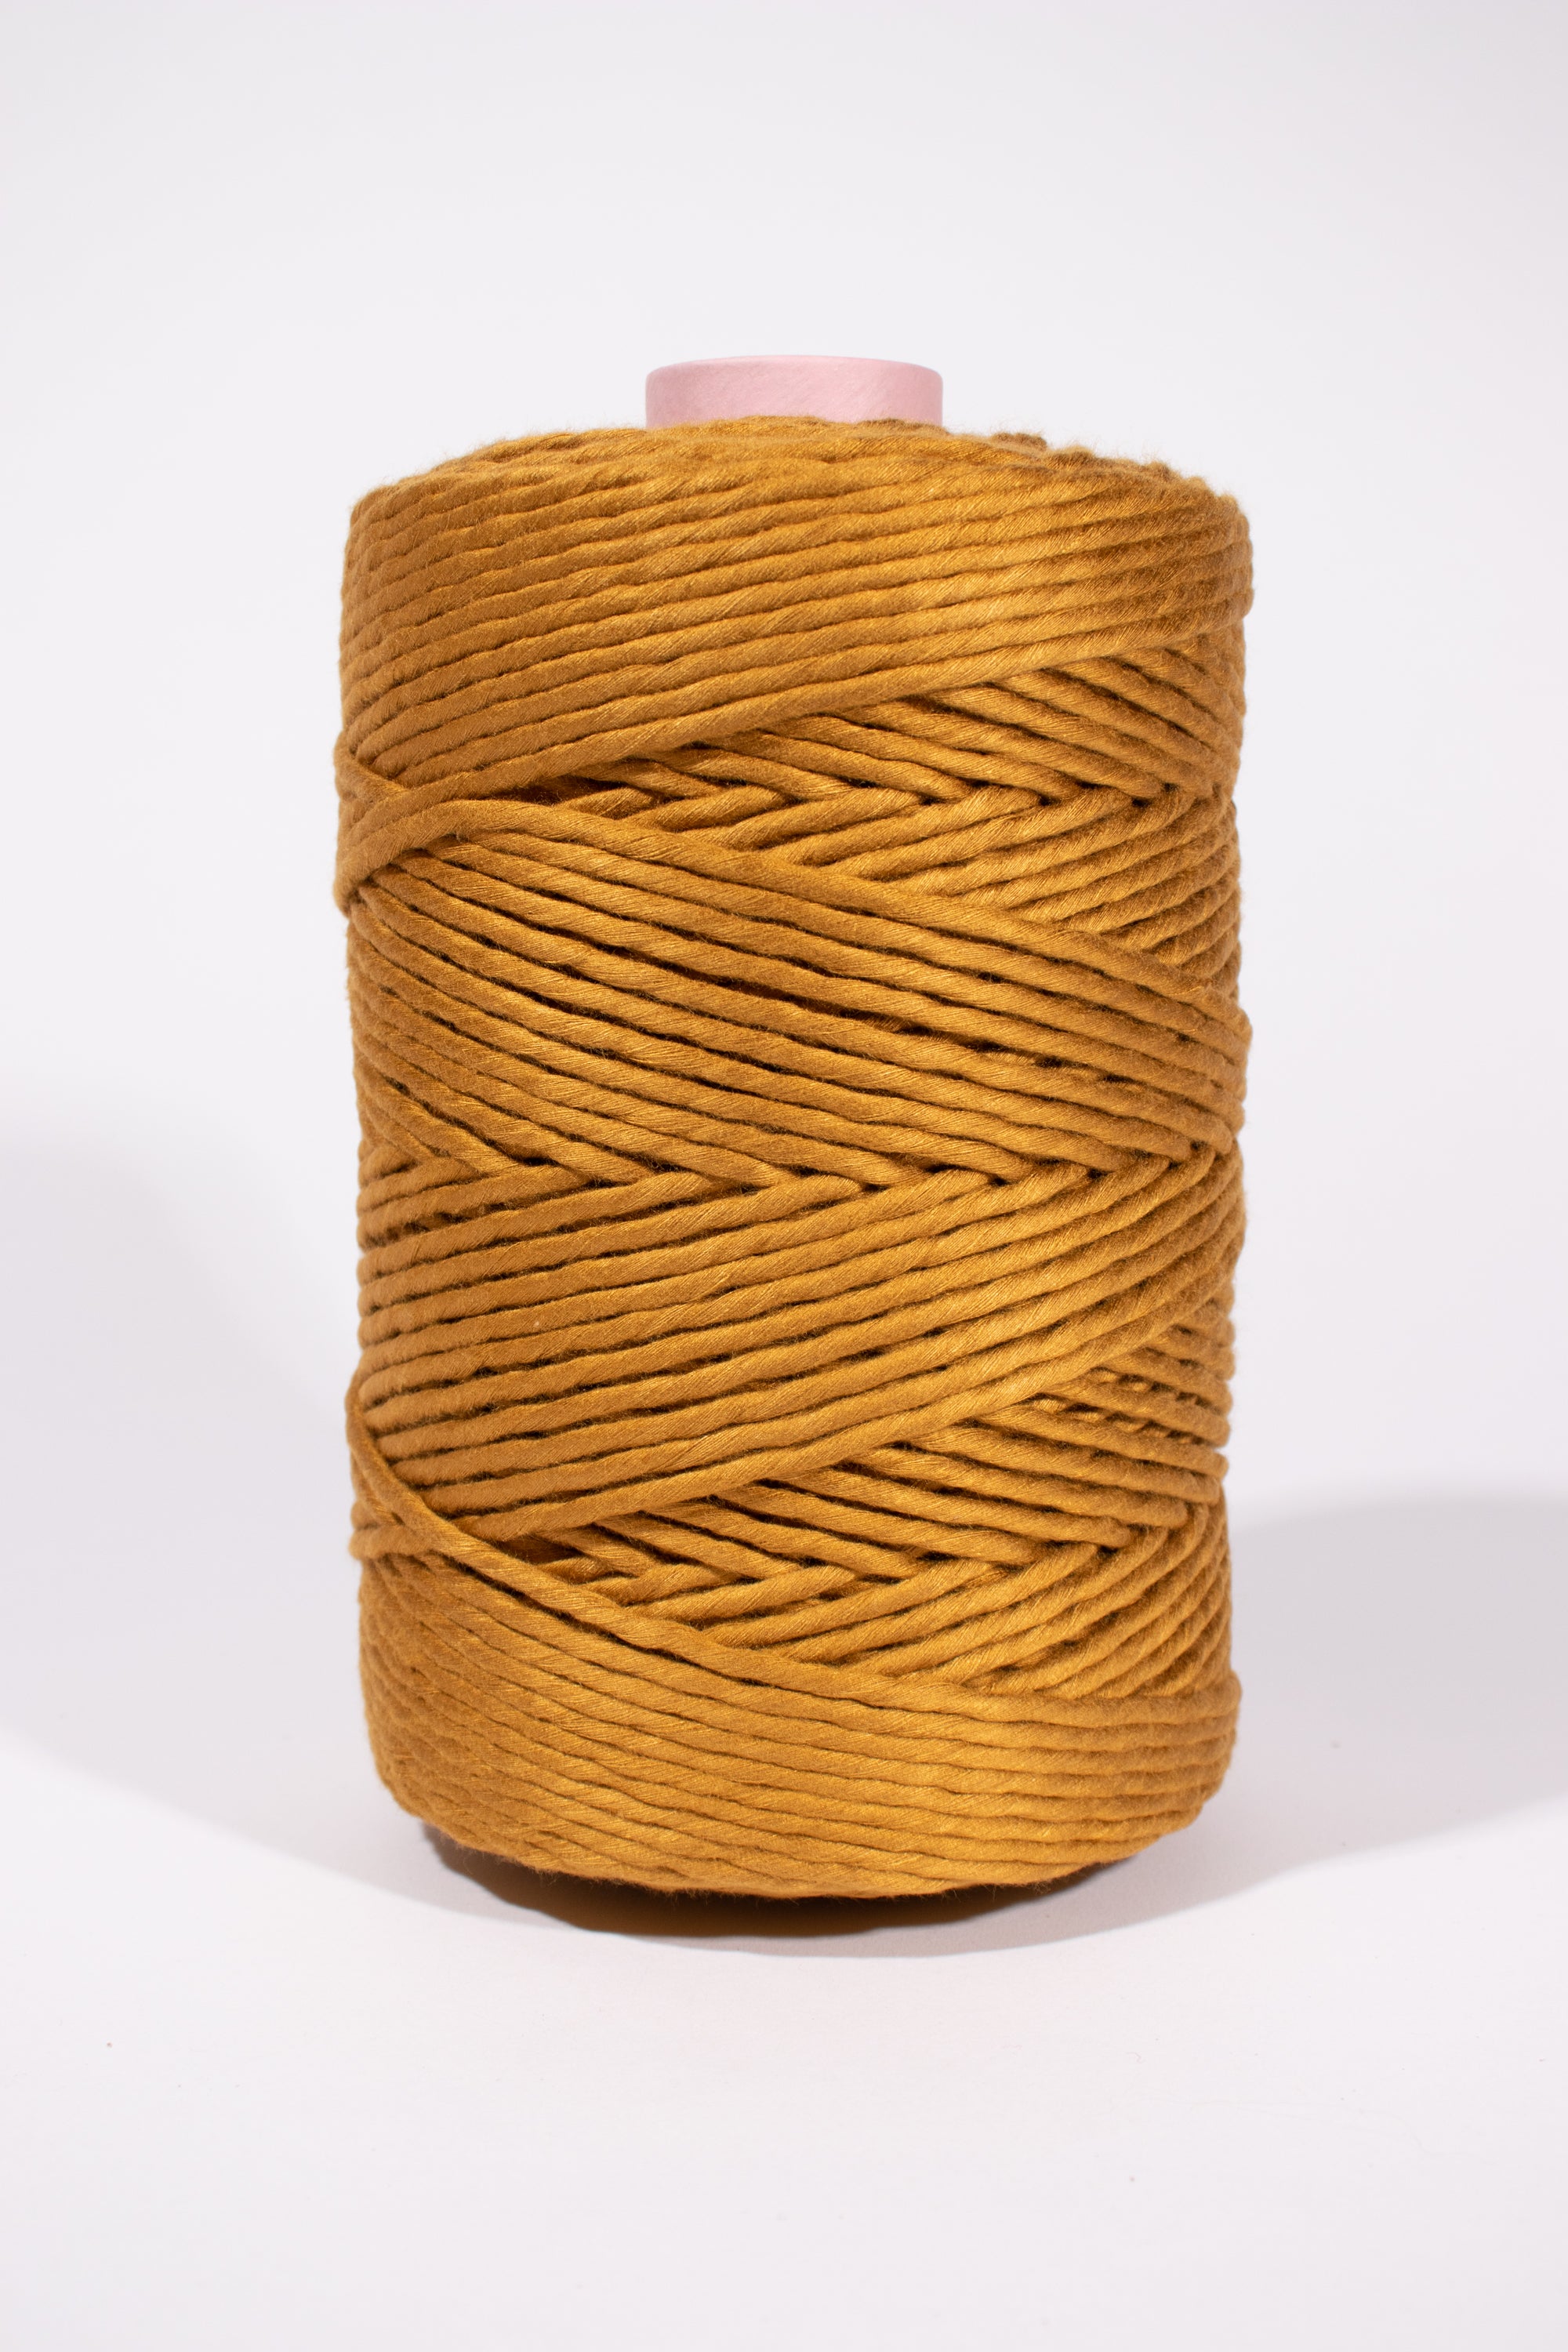  2mm 600ft Colored Natural Jute Twine String for Gift